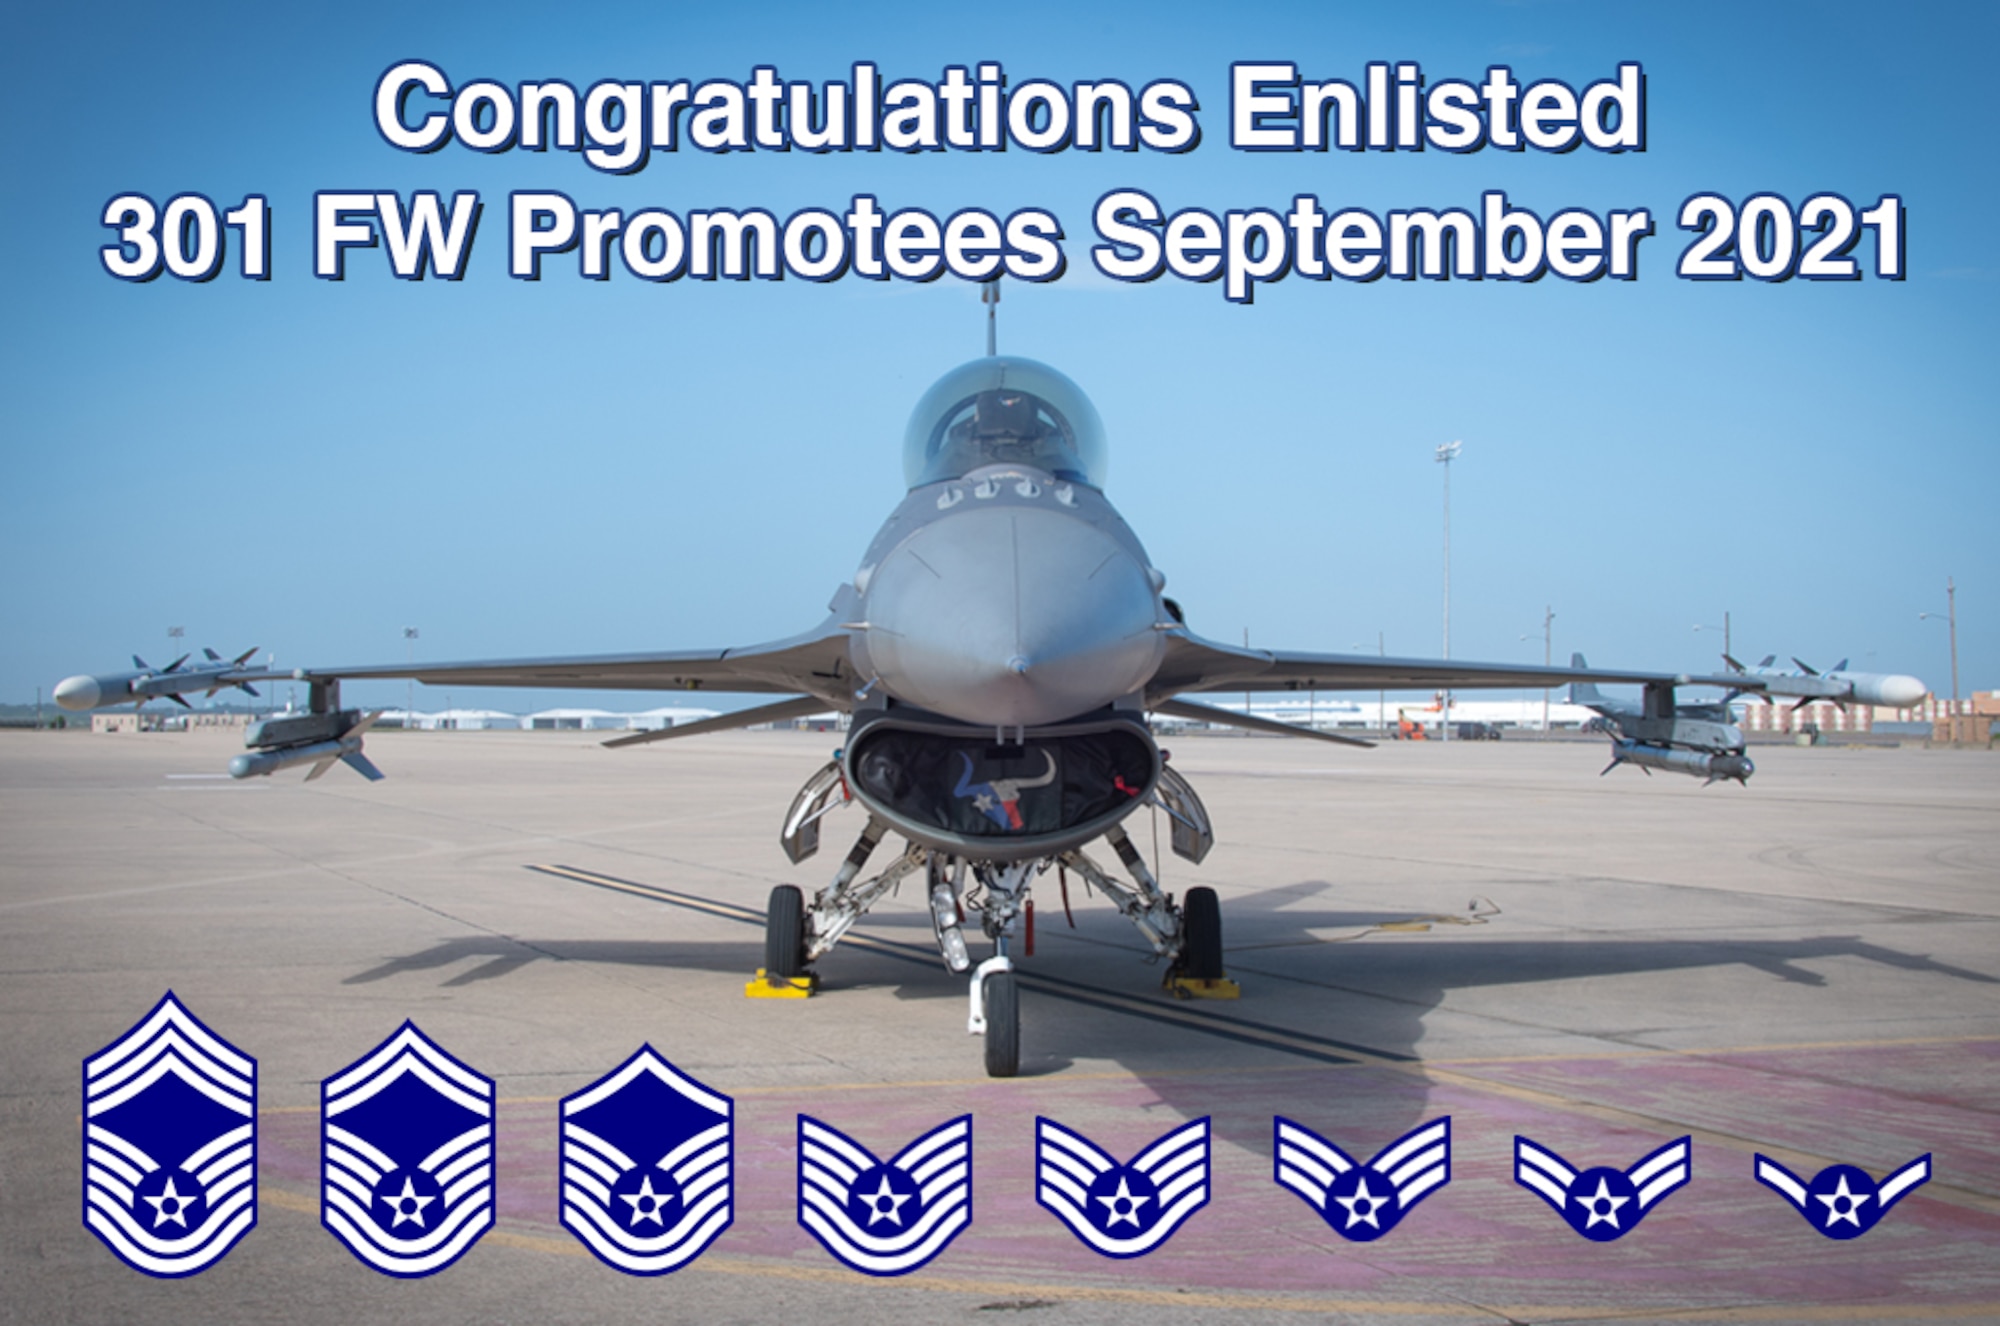 301 FW Enlisted Promotees for September 2021